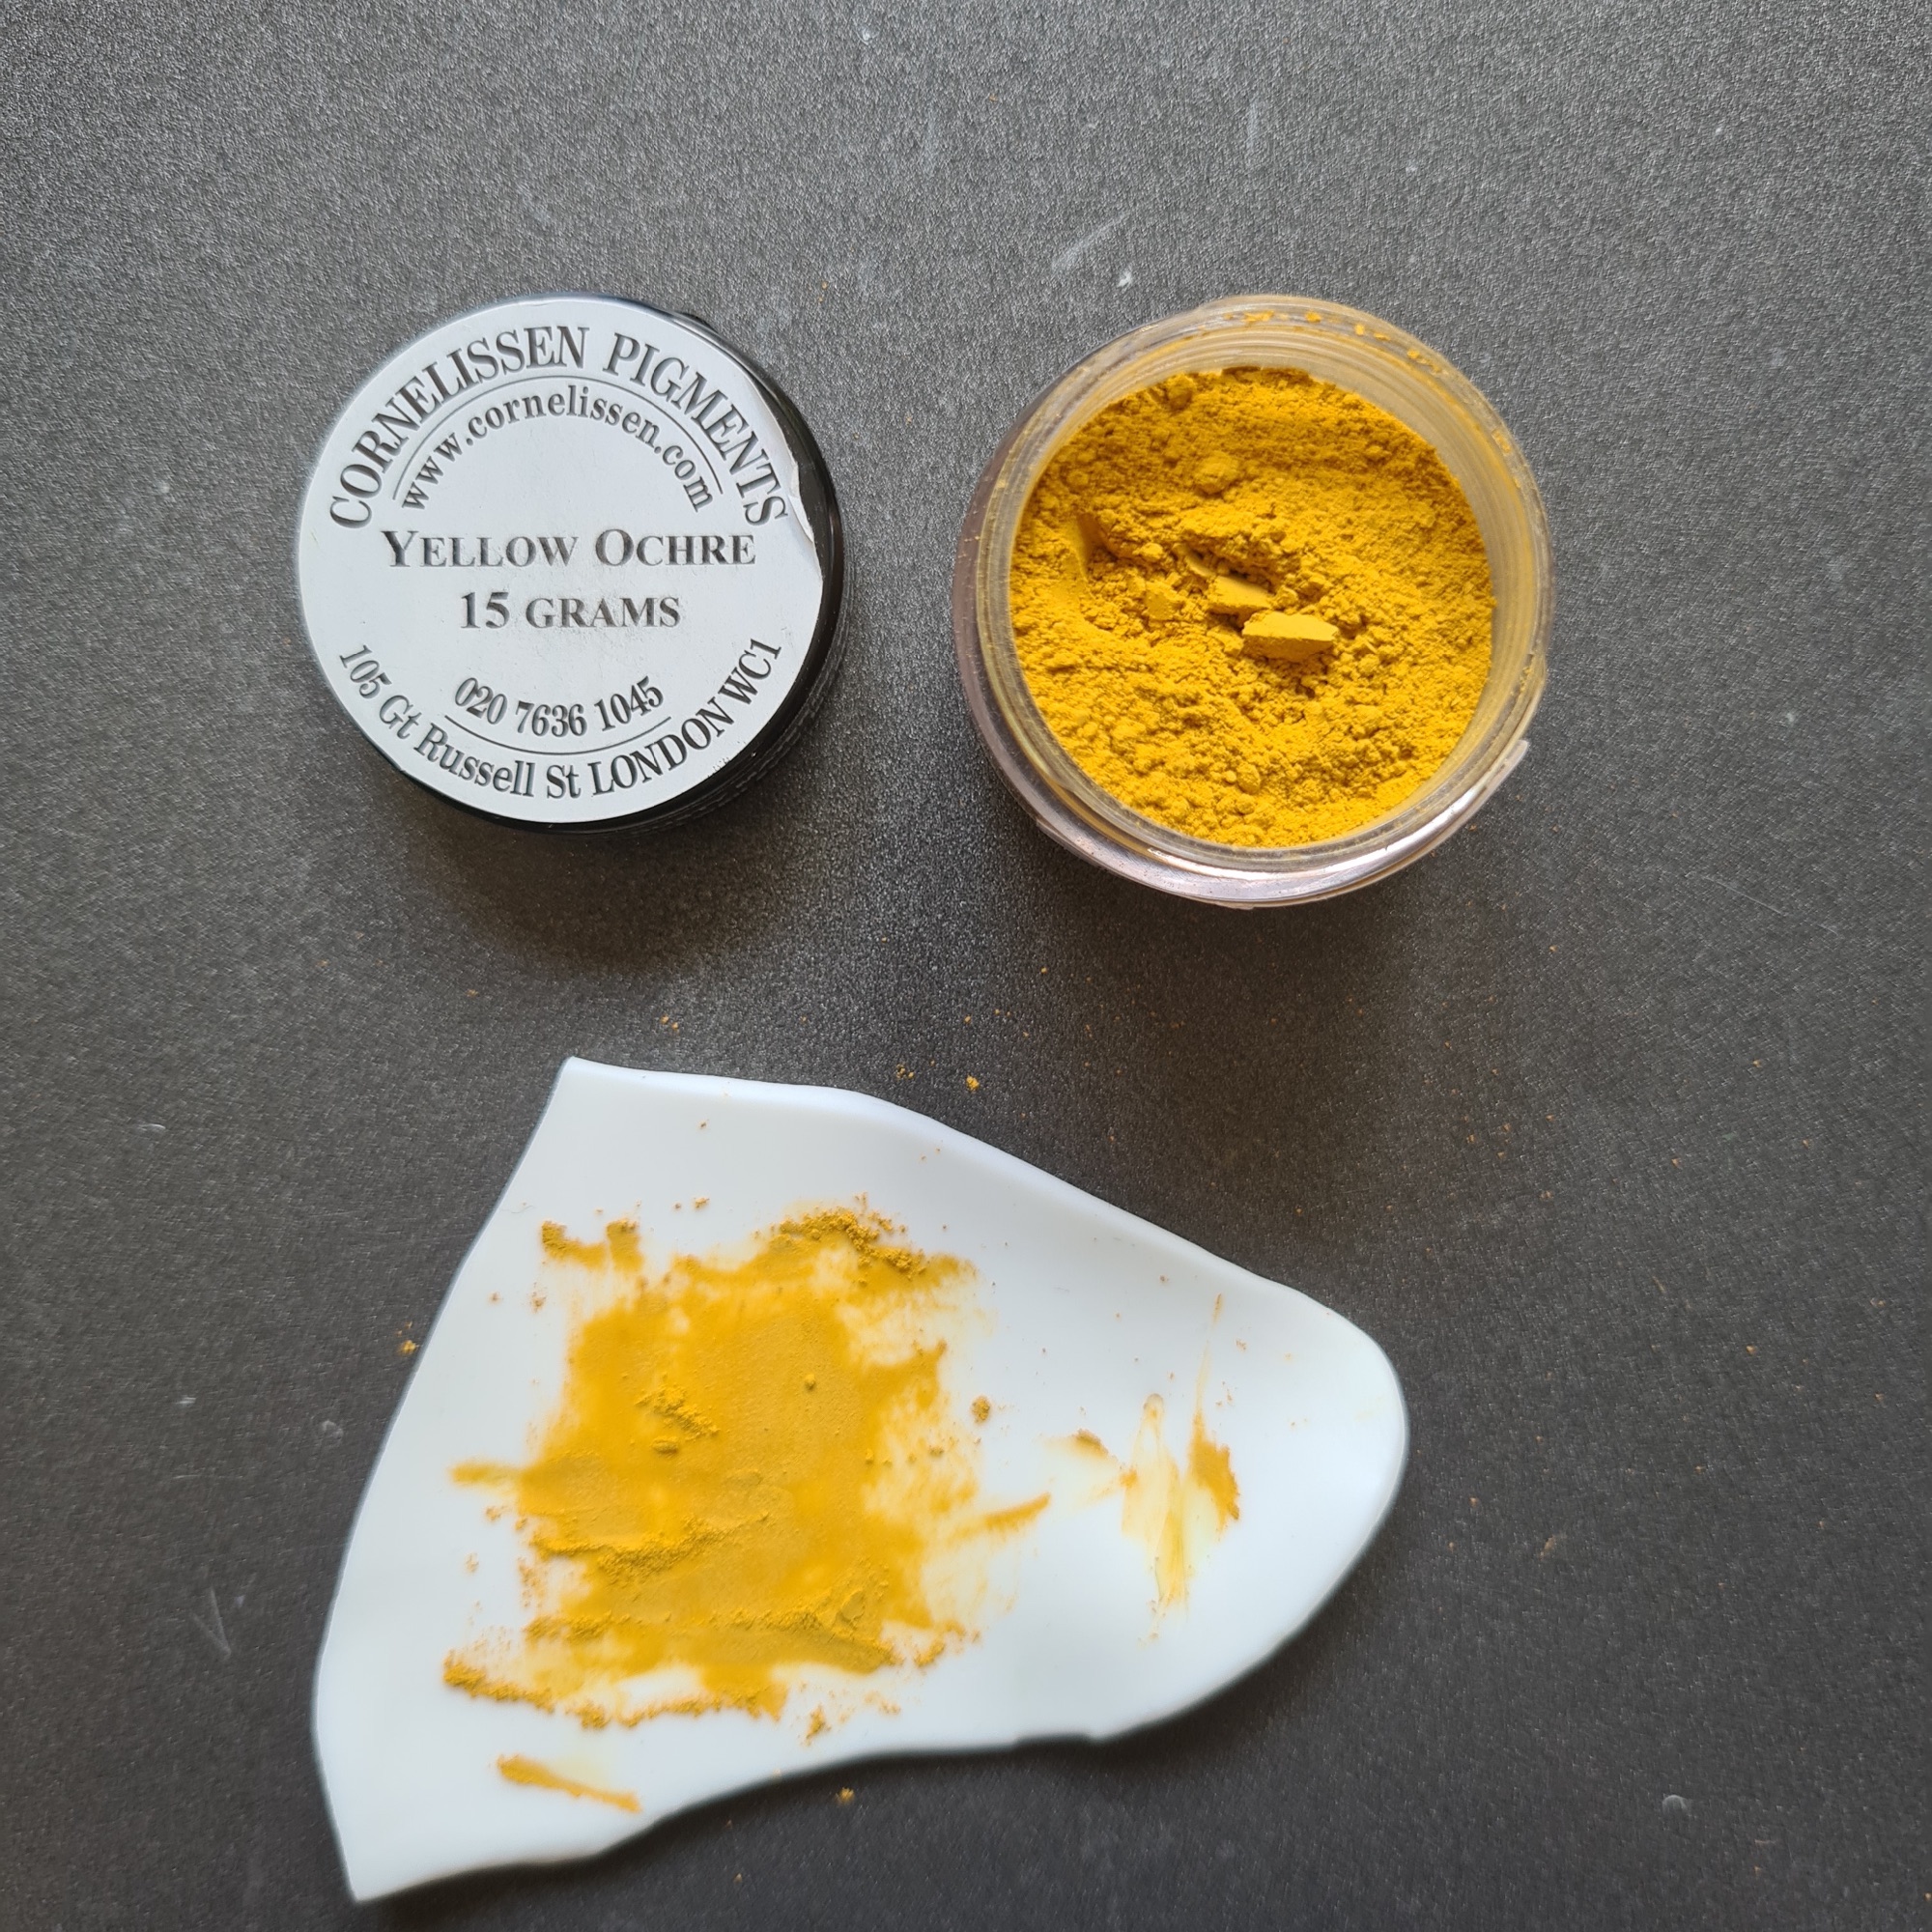 yellow ochre powdered artists pigment mixed into porcelain white polymer clay